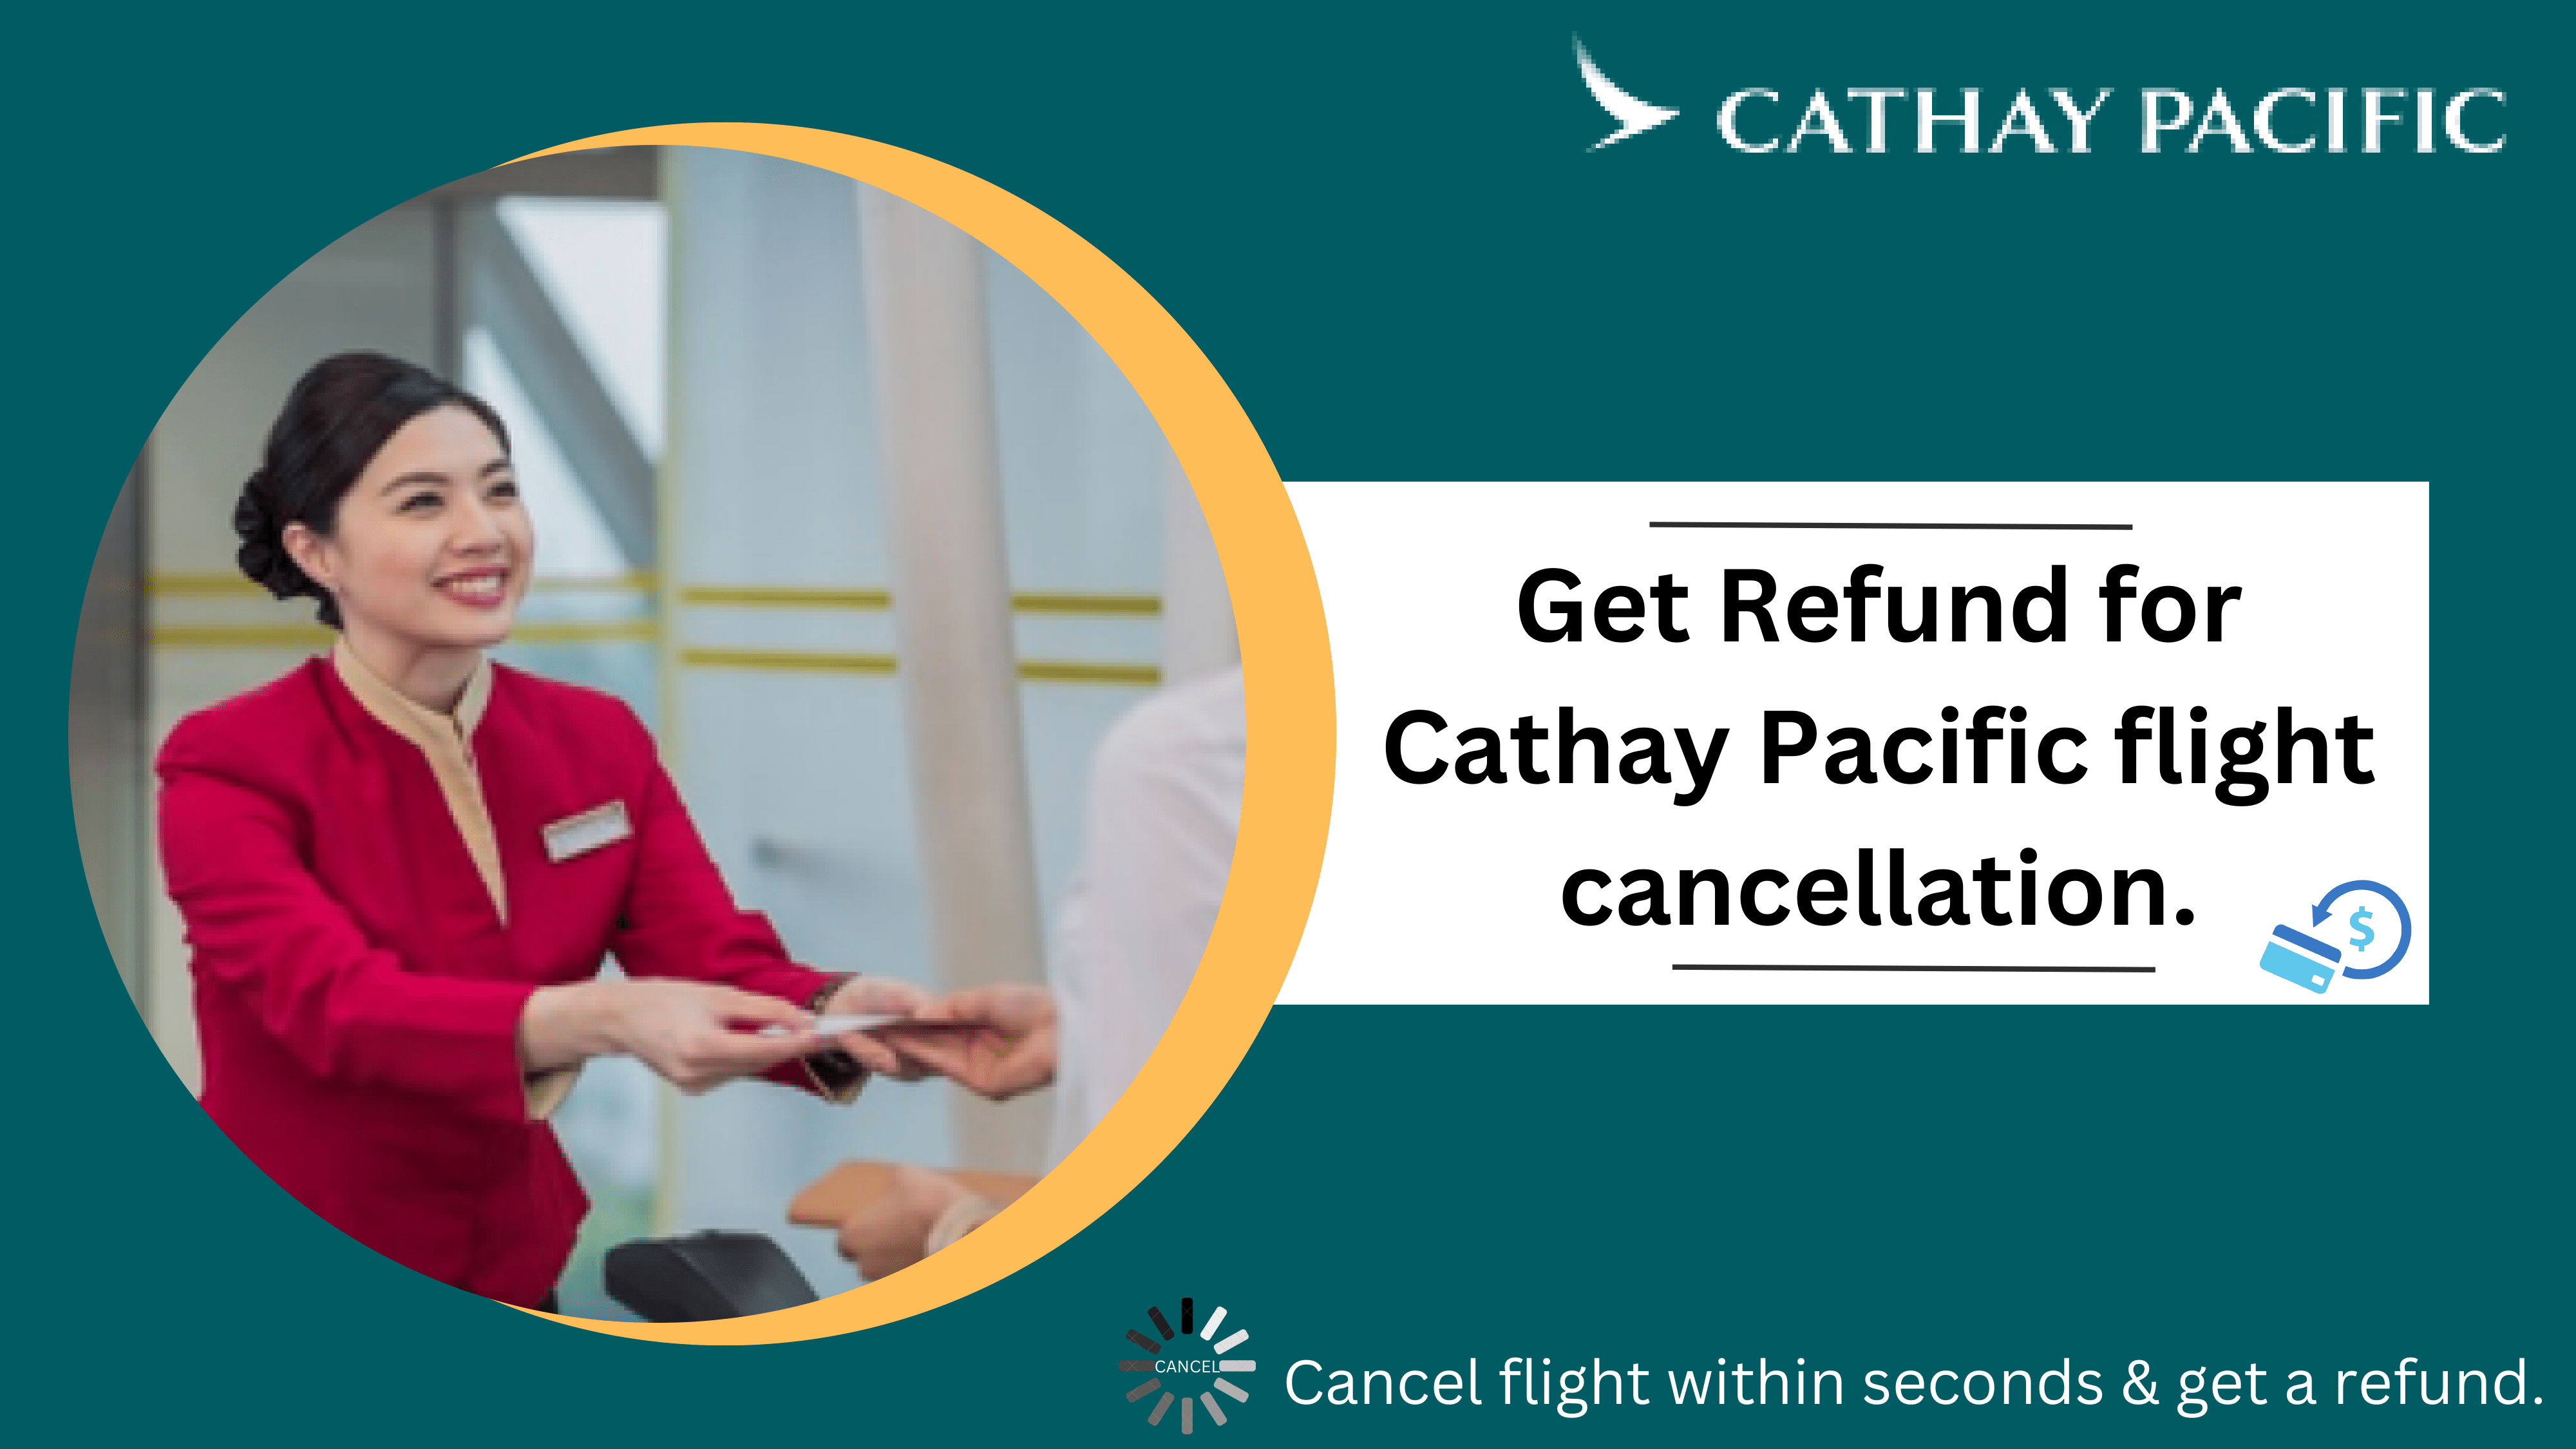 Cathay Pacific Refund Policy